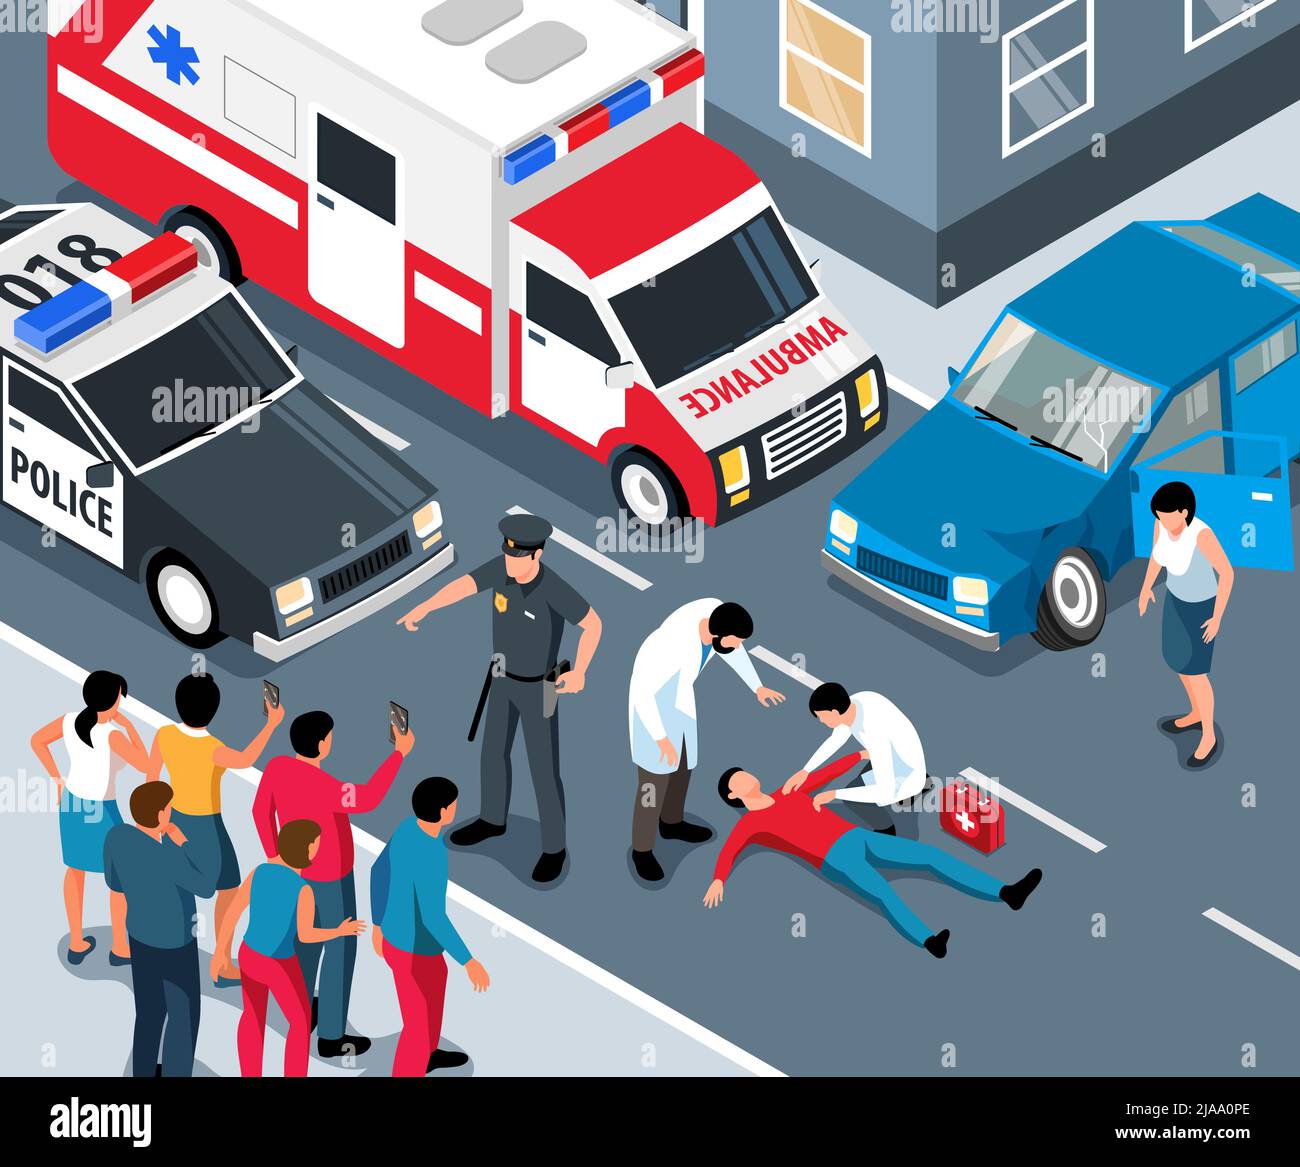 Isometric emergency service composition with outdoor street scenery and doctors helping victim with police ambulance cars vector illustration Stock Vector